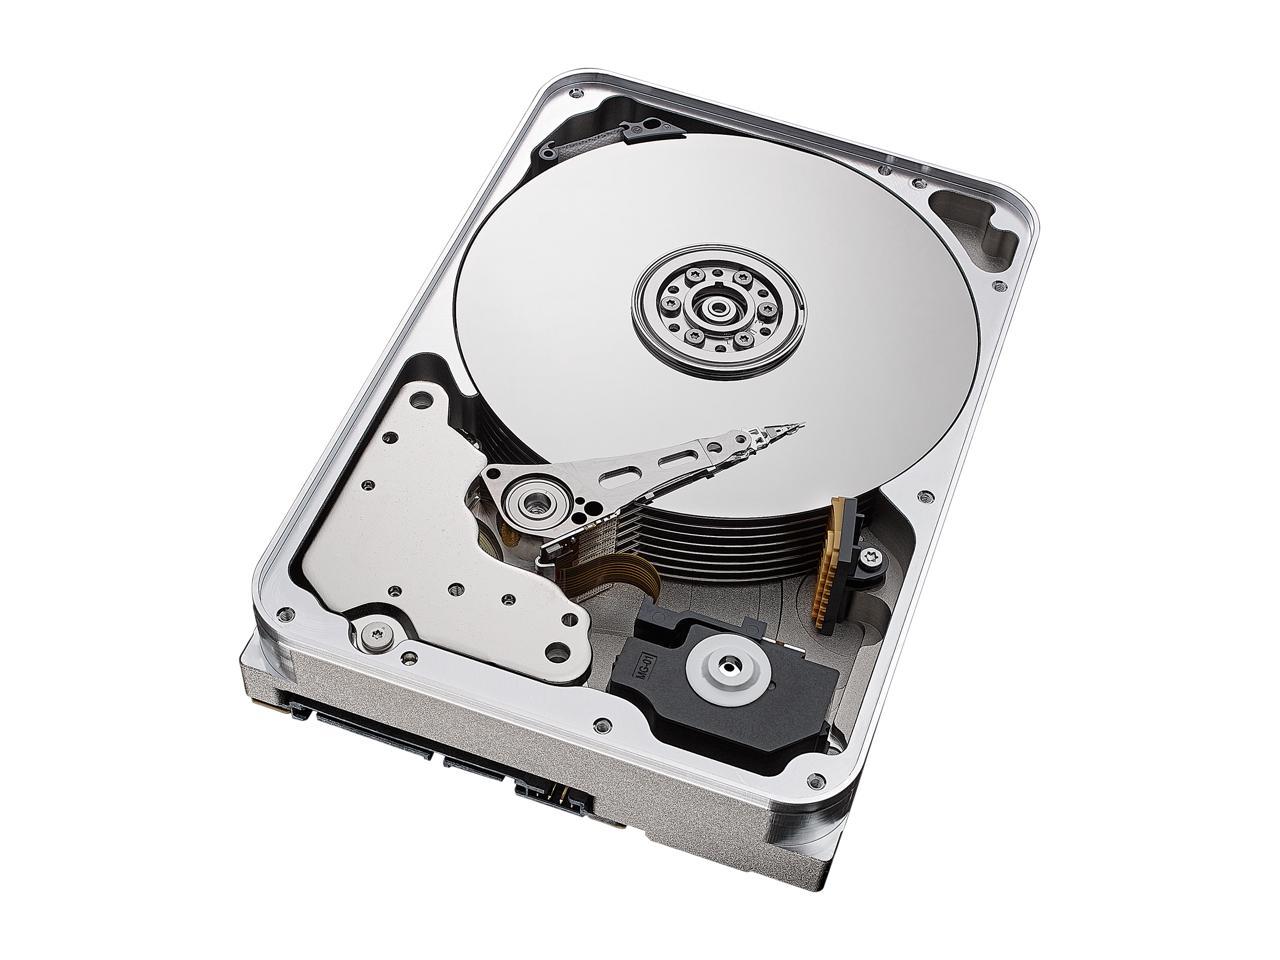 Seagate Ironwolf 16Tb Nas Hard Drive 7200 Rpm 256Mb Cache Sata 6.0Gb/S Cmr 3.5" Internal Hdd For Raid Network Attached Storage St16000Vn001